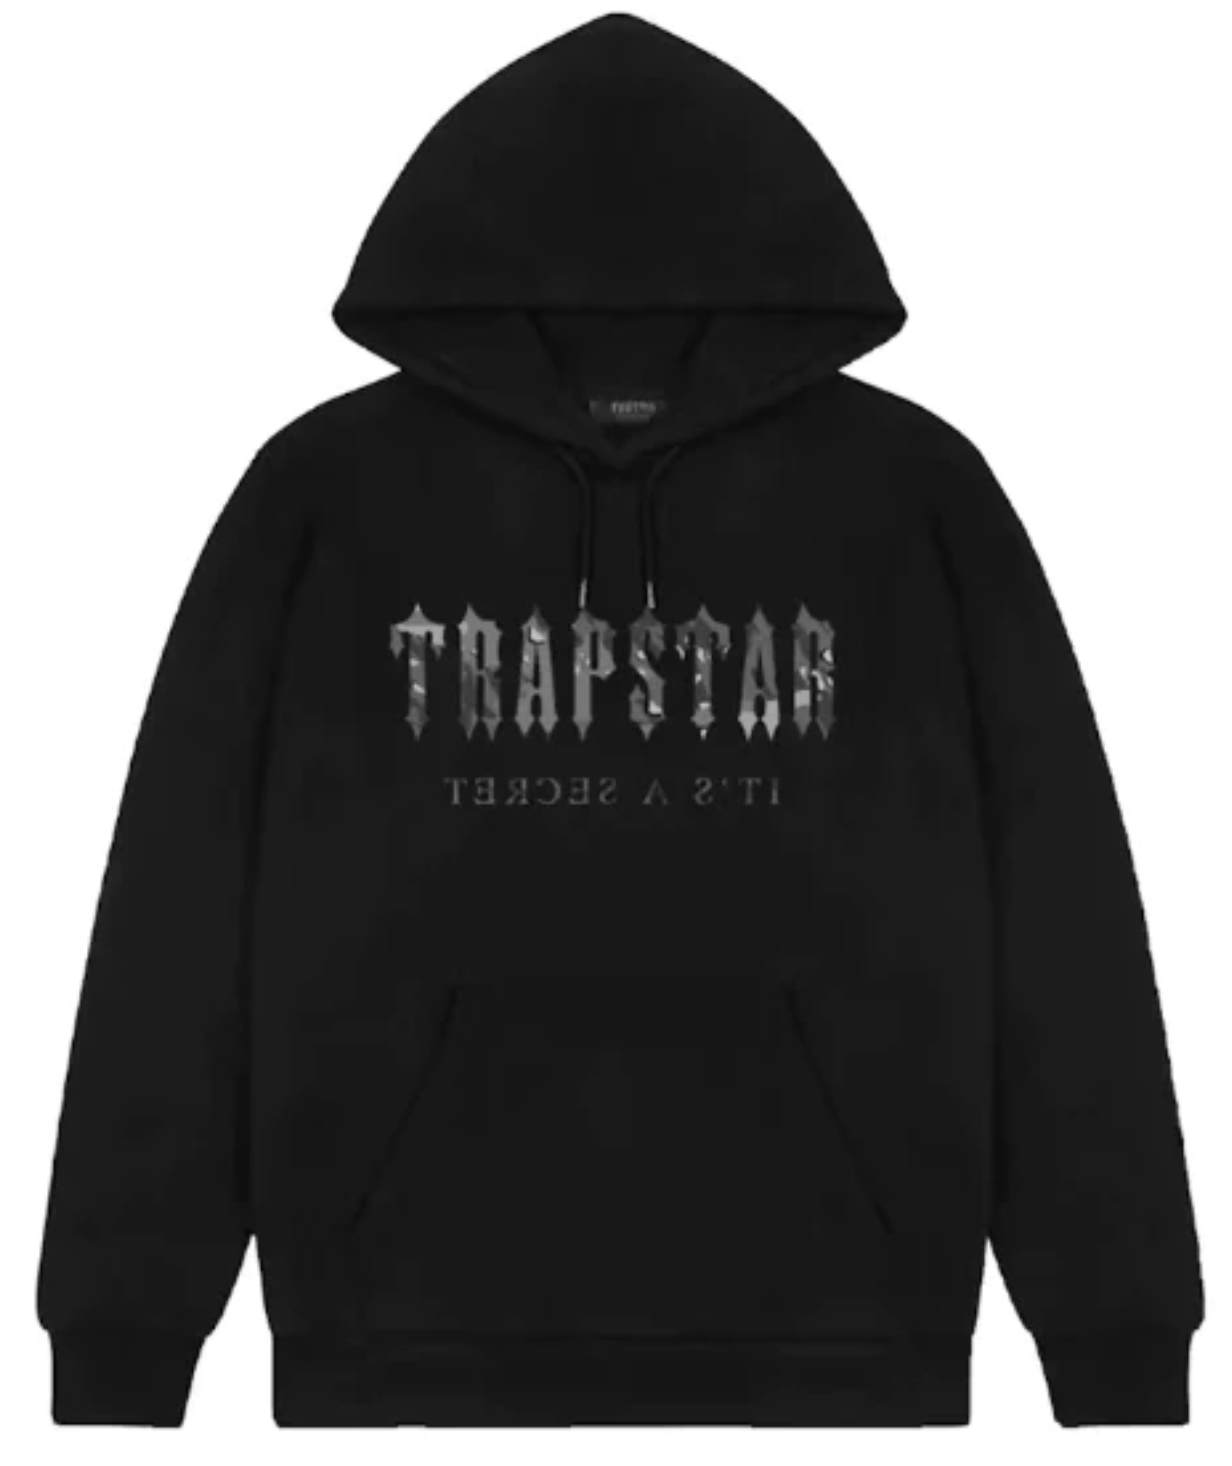 Trapstar Decoded Blackout Edition Hoodie Black